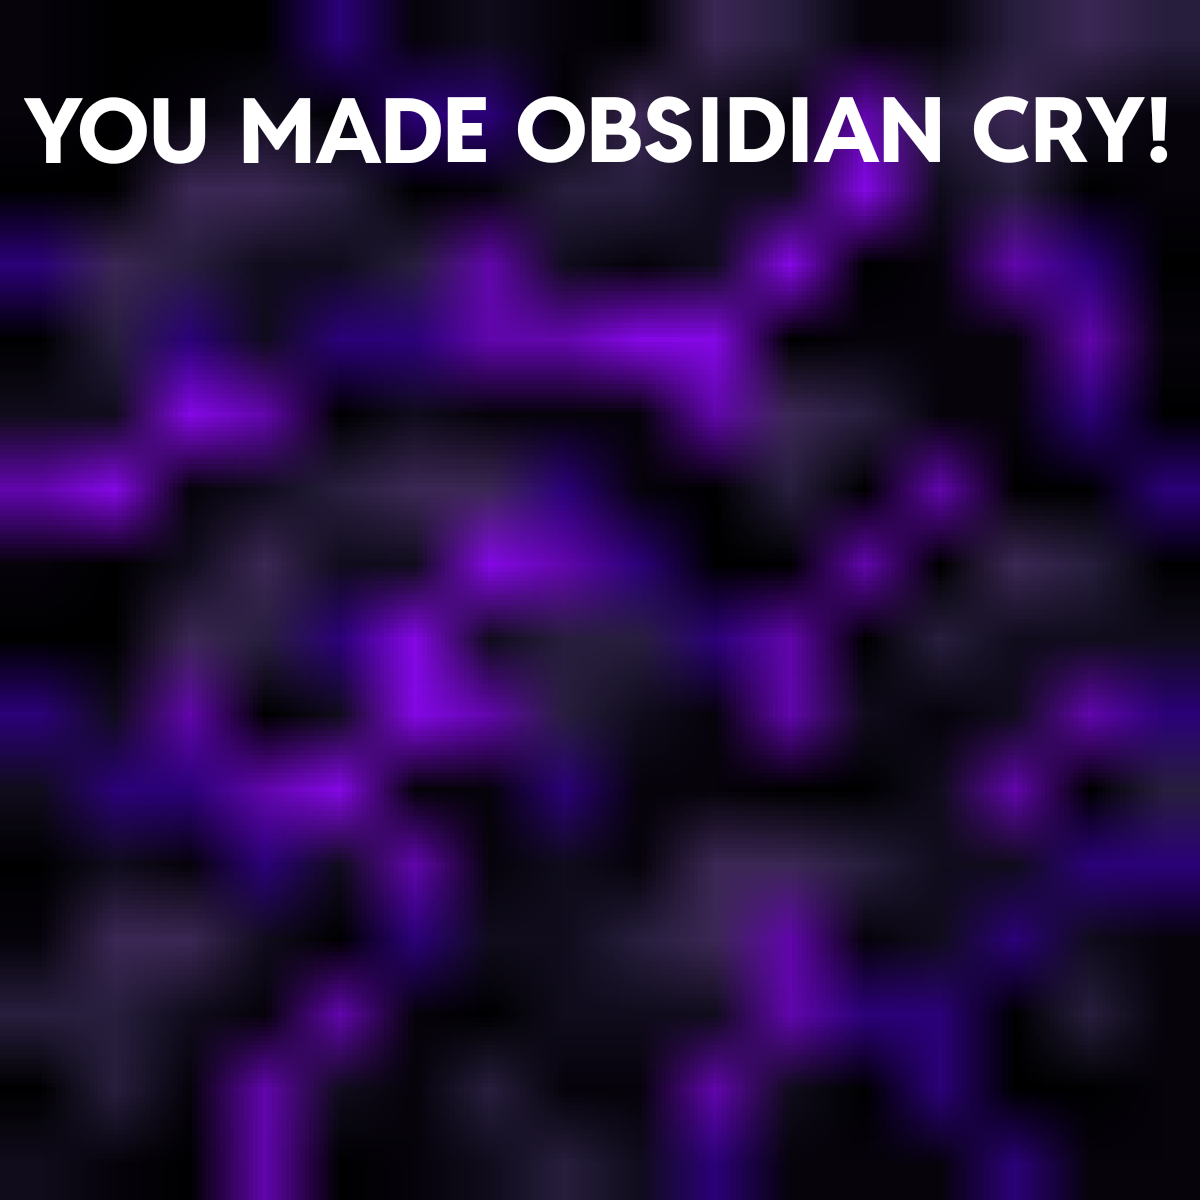 Minecraft Memes - The Obsidian weeps, thanks to you!